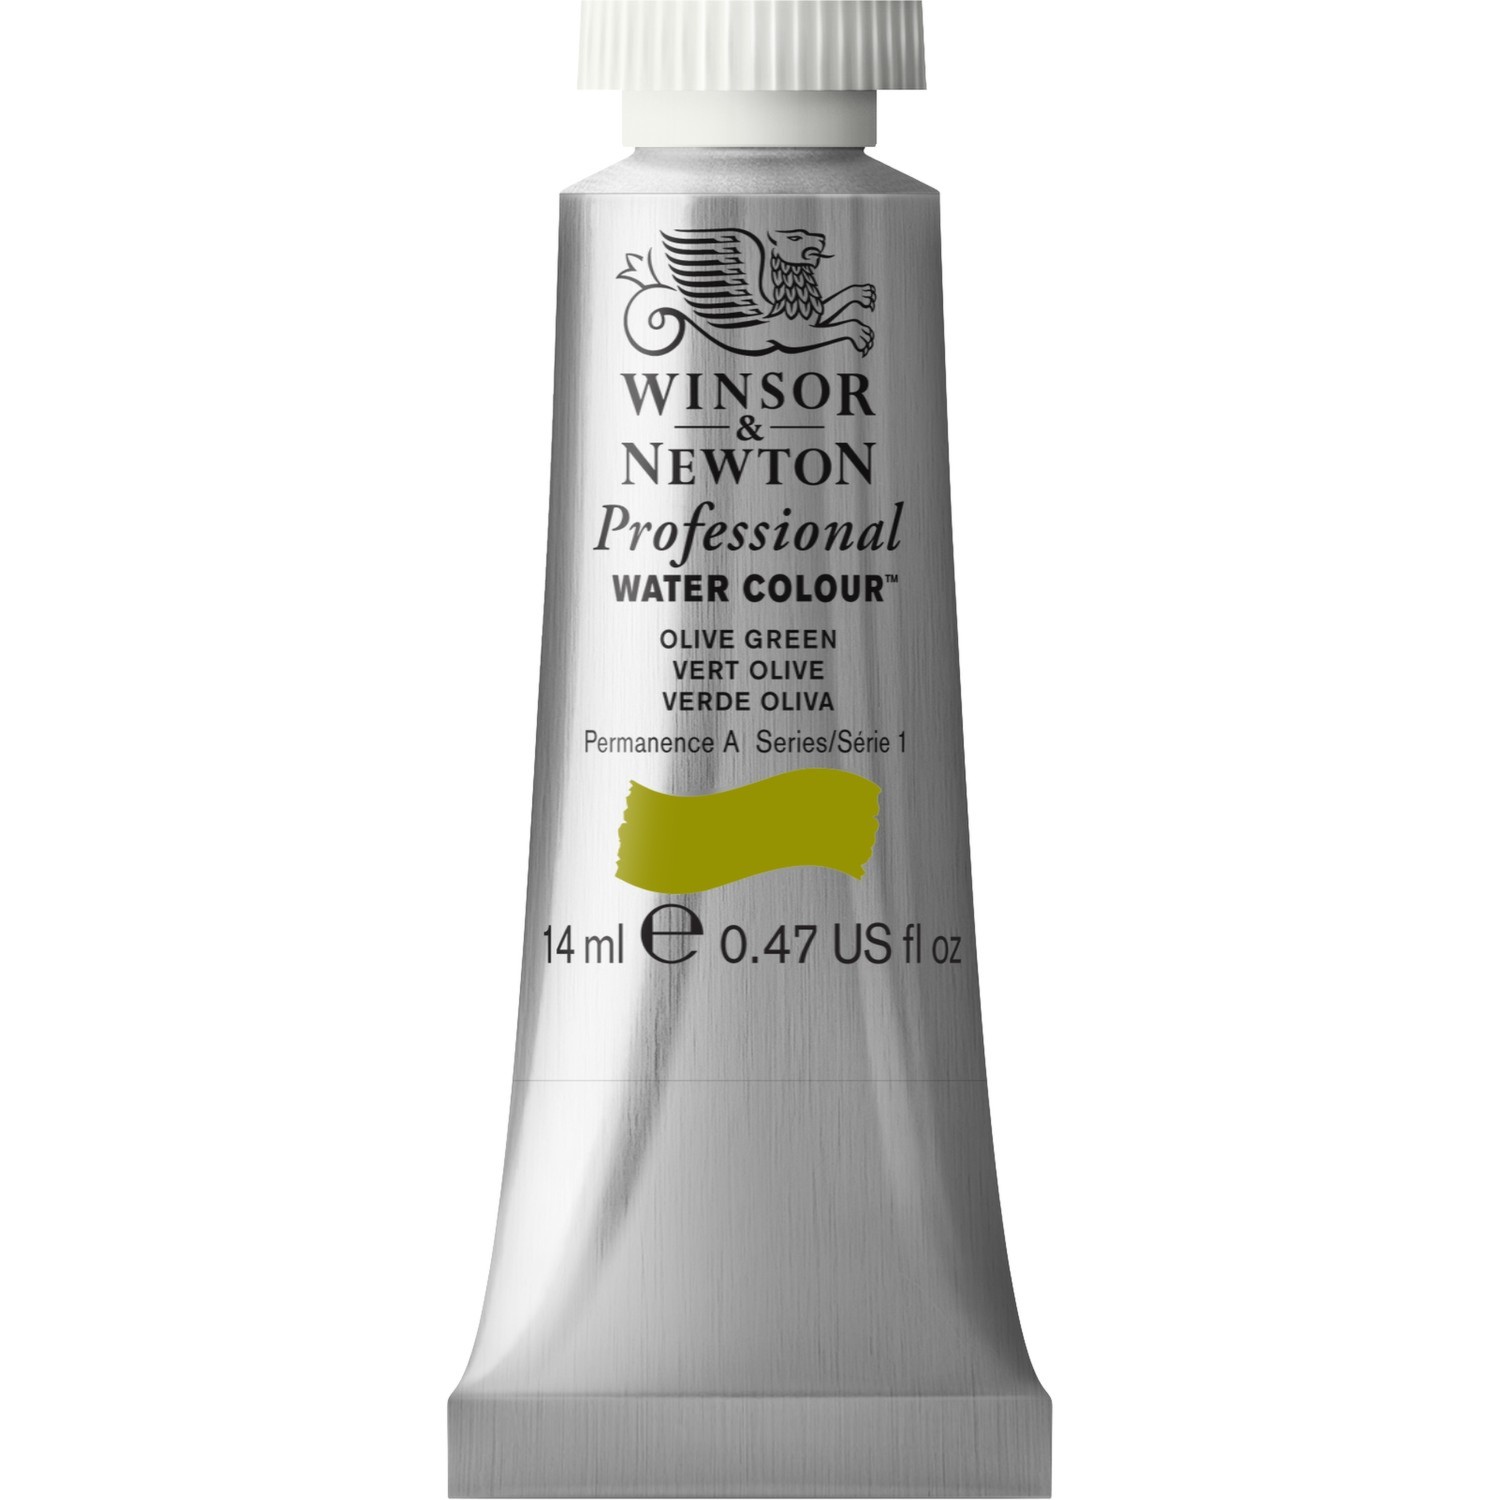 Winsor and Newton 14ml Professional Watercolour Paint - Olive Green Image 1